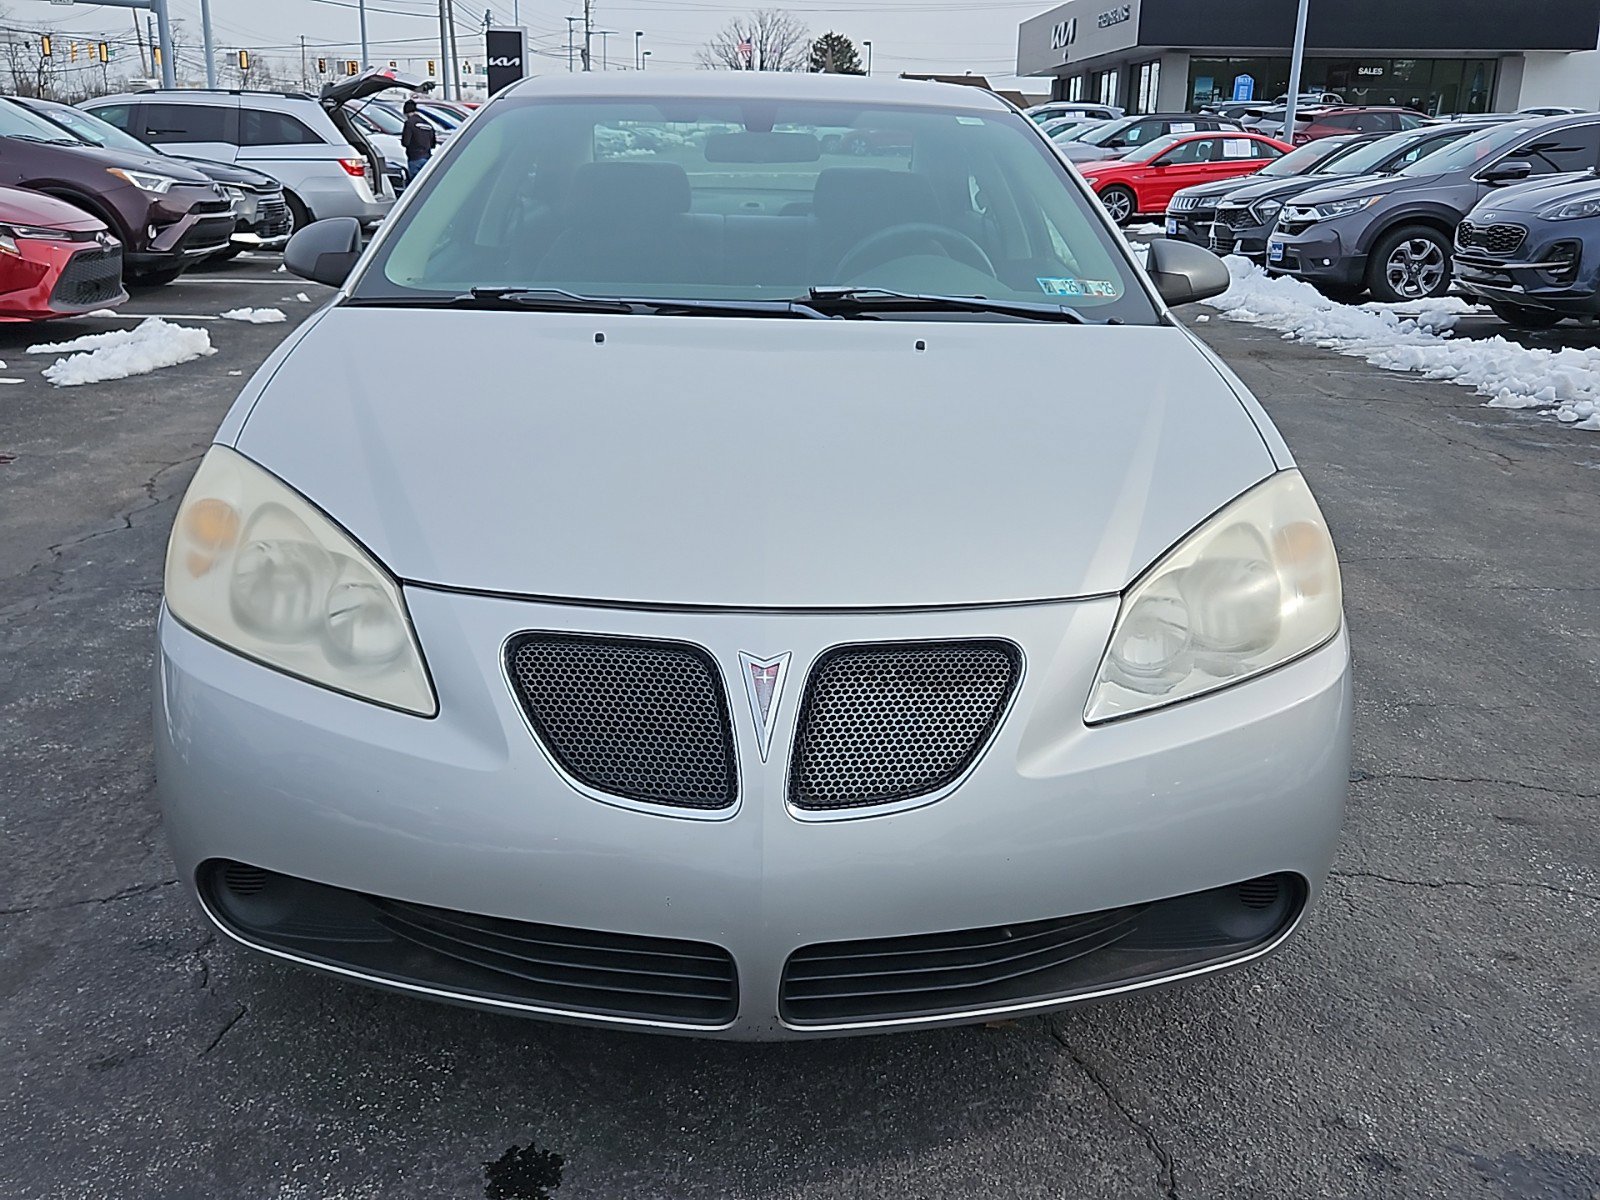 Used 2007 Pontiac G6  with VIN 1G2ZF58B174157715 for sale in Mechanicsburg, PA